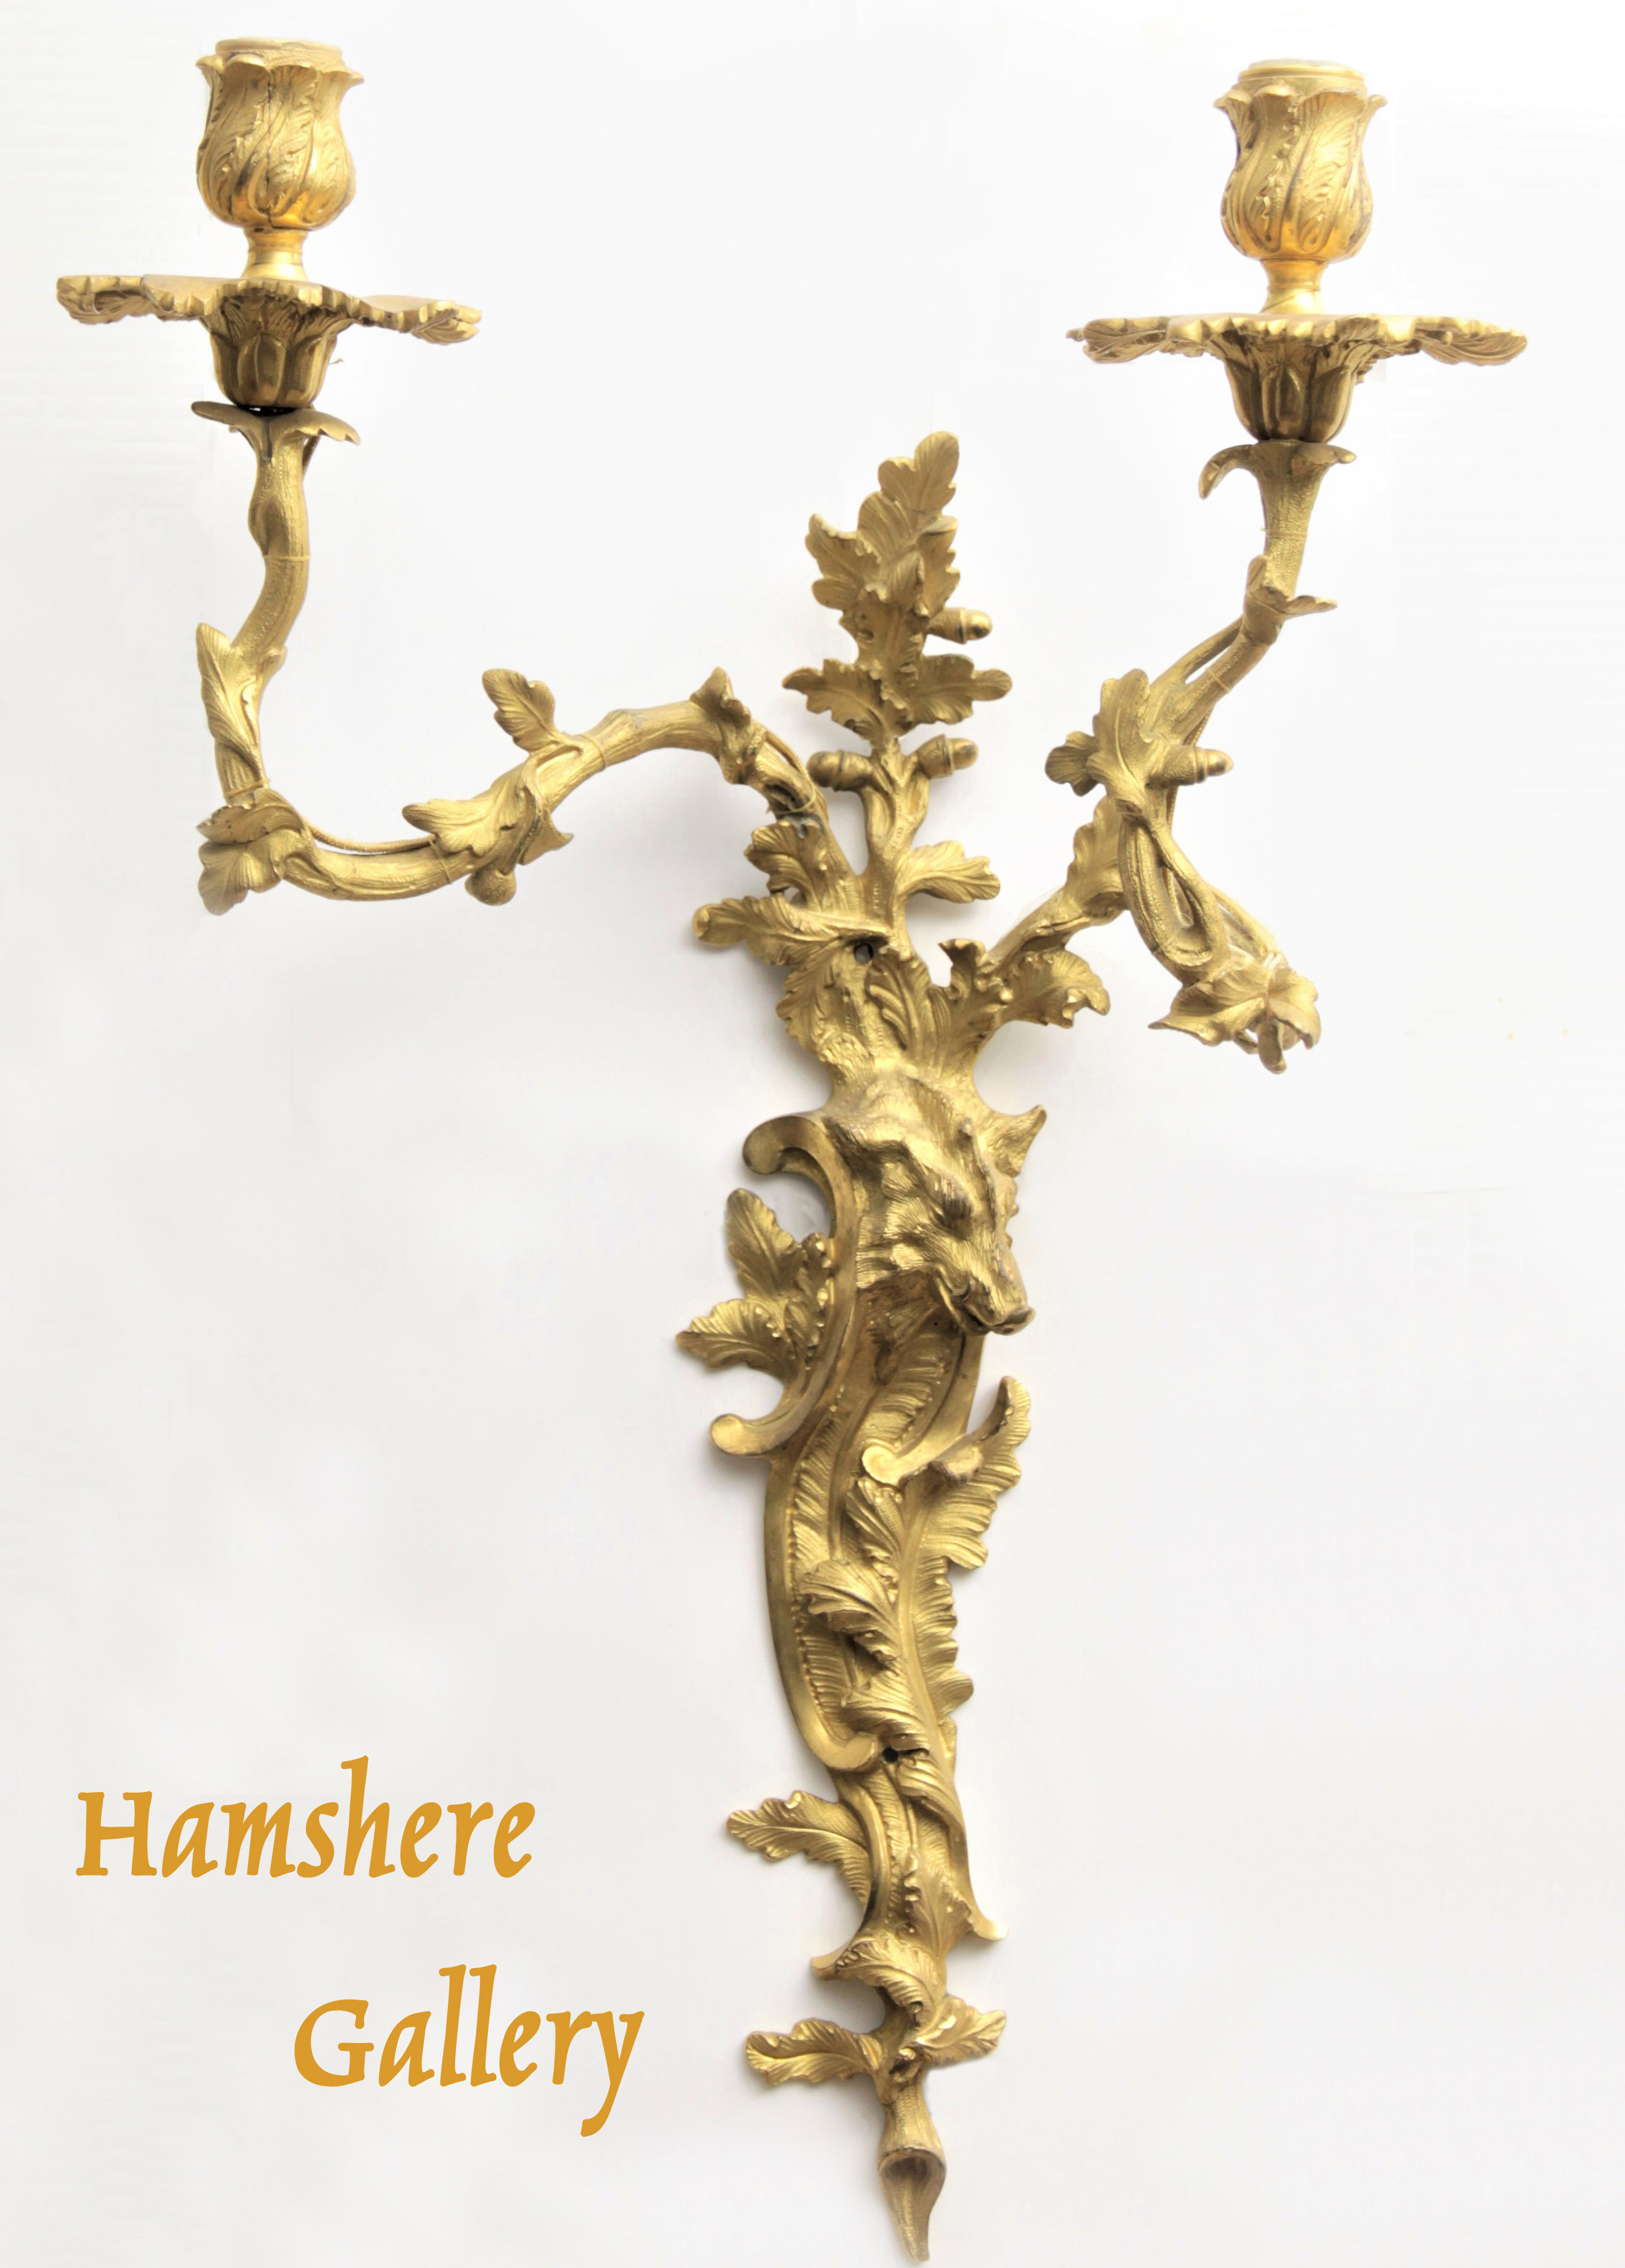 Click for larger image: 19th century, French bronze doré hunting / ‘chasse’ boar stag / sanglier cerf wall sconces / ‘appliques’after Jean Joseph de Saint-Germain (French 1719-1791) - 19th century, French bronze doré hunting / ‘chasse’ boar stag / sanglier cerf wall sconces / ‘appliques’after Jean Joseph de Saint-Germain (French 1719-1791)